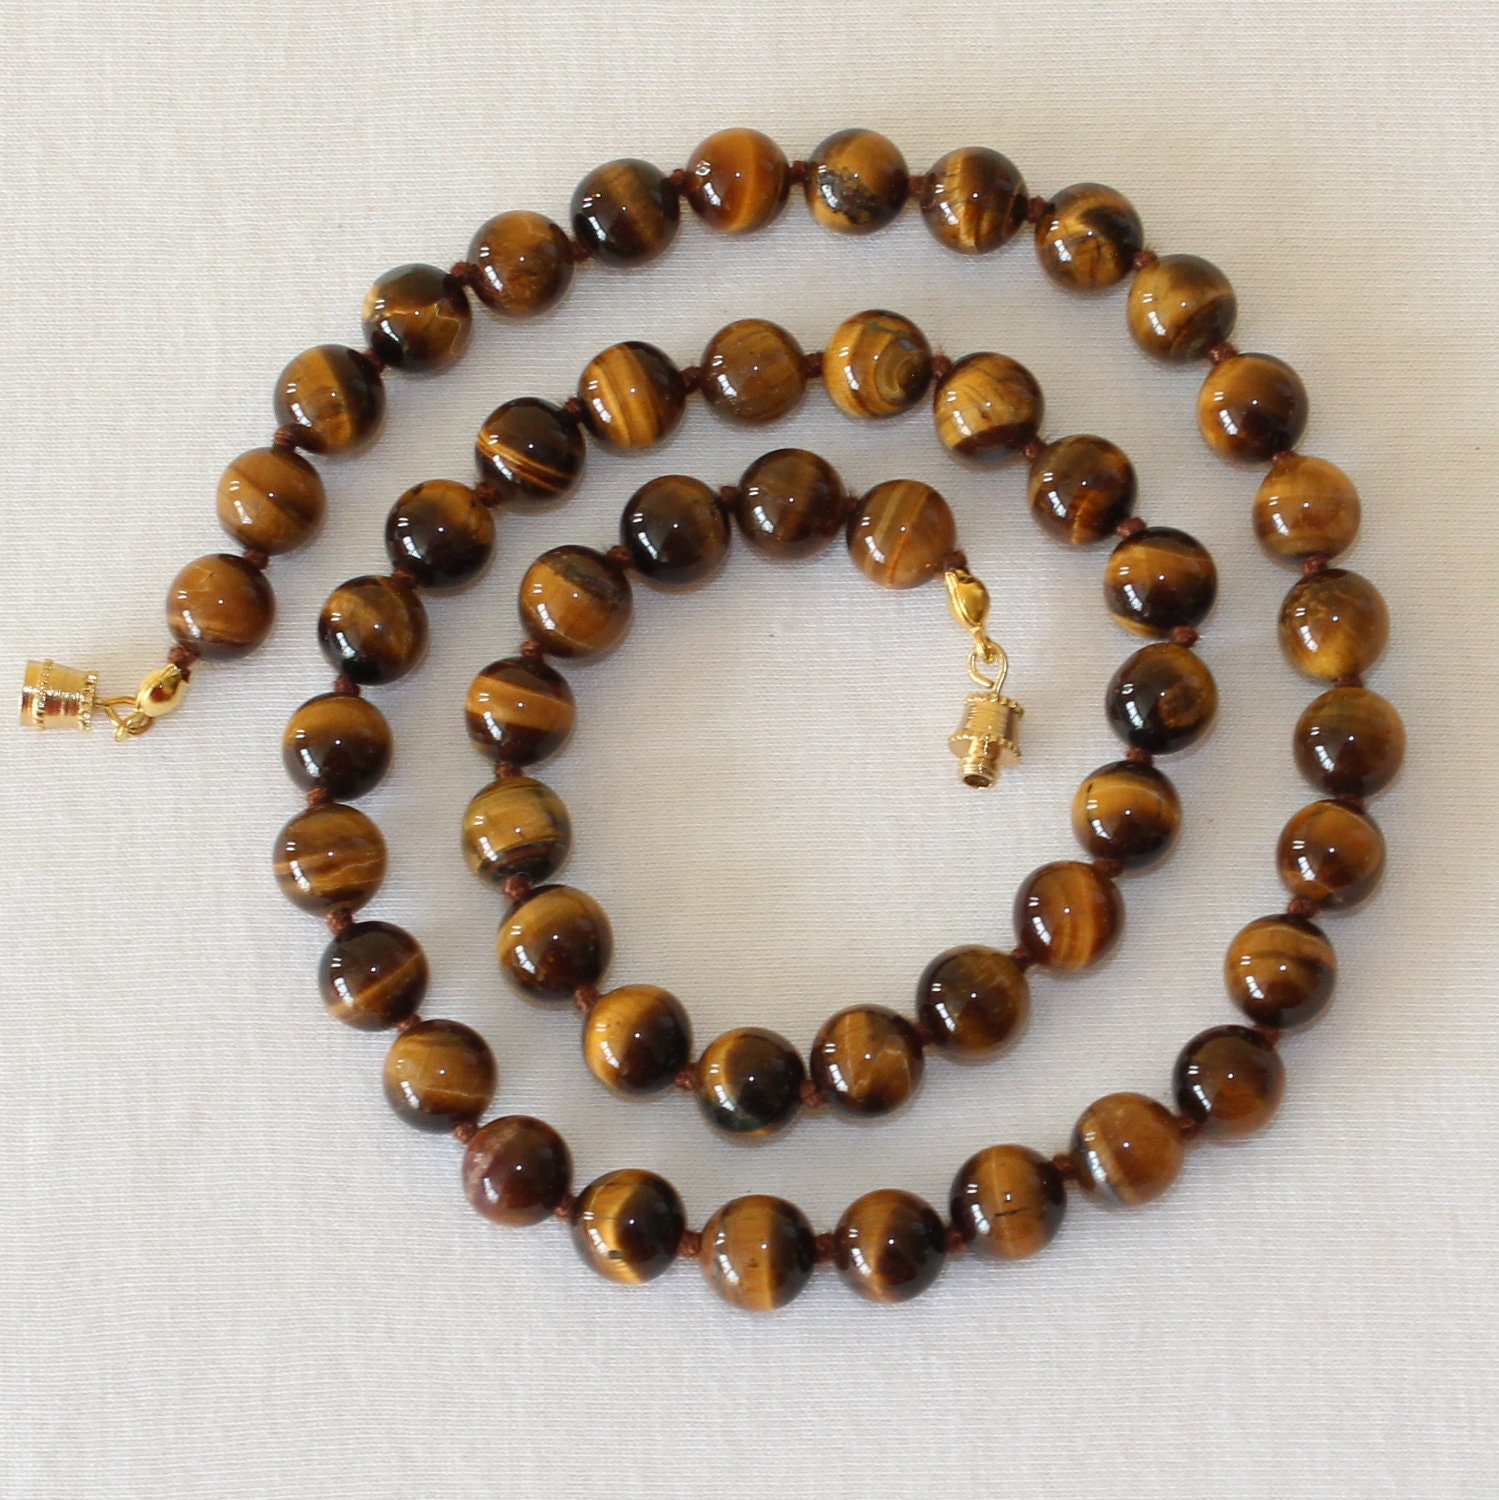 134.9 grams Rare Unusual Natural Tigers Eye Beads NECKLACE - model  #1-lis-21-5